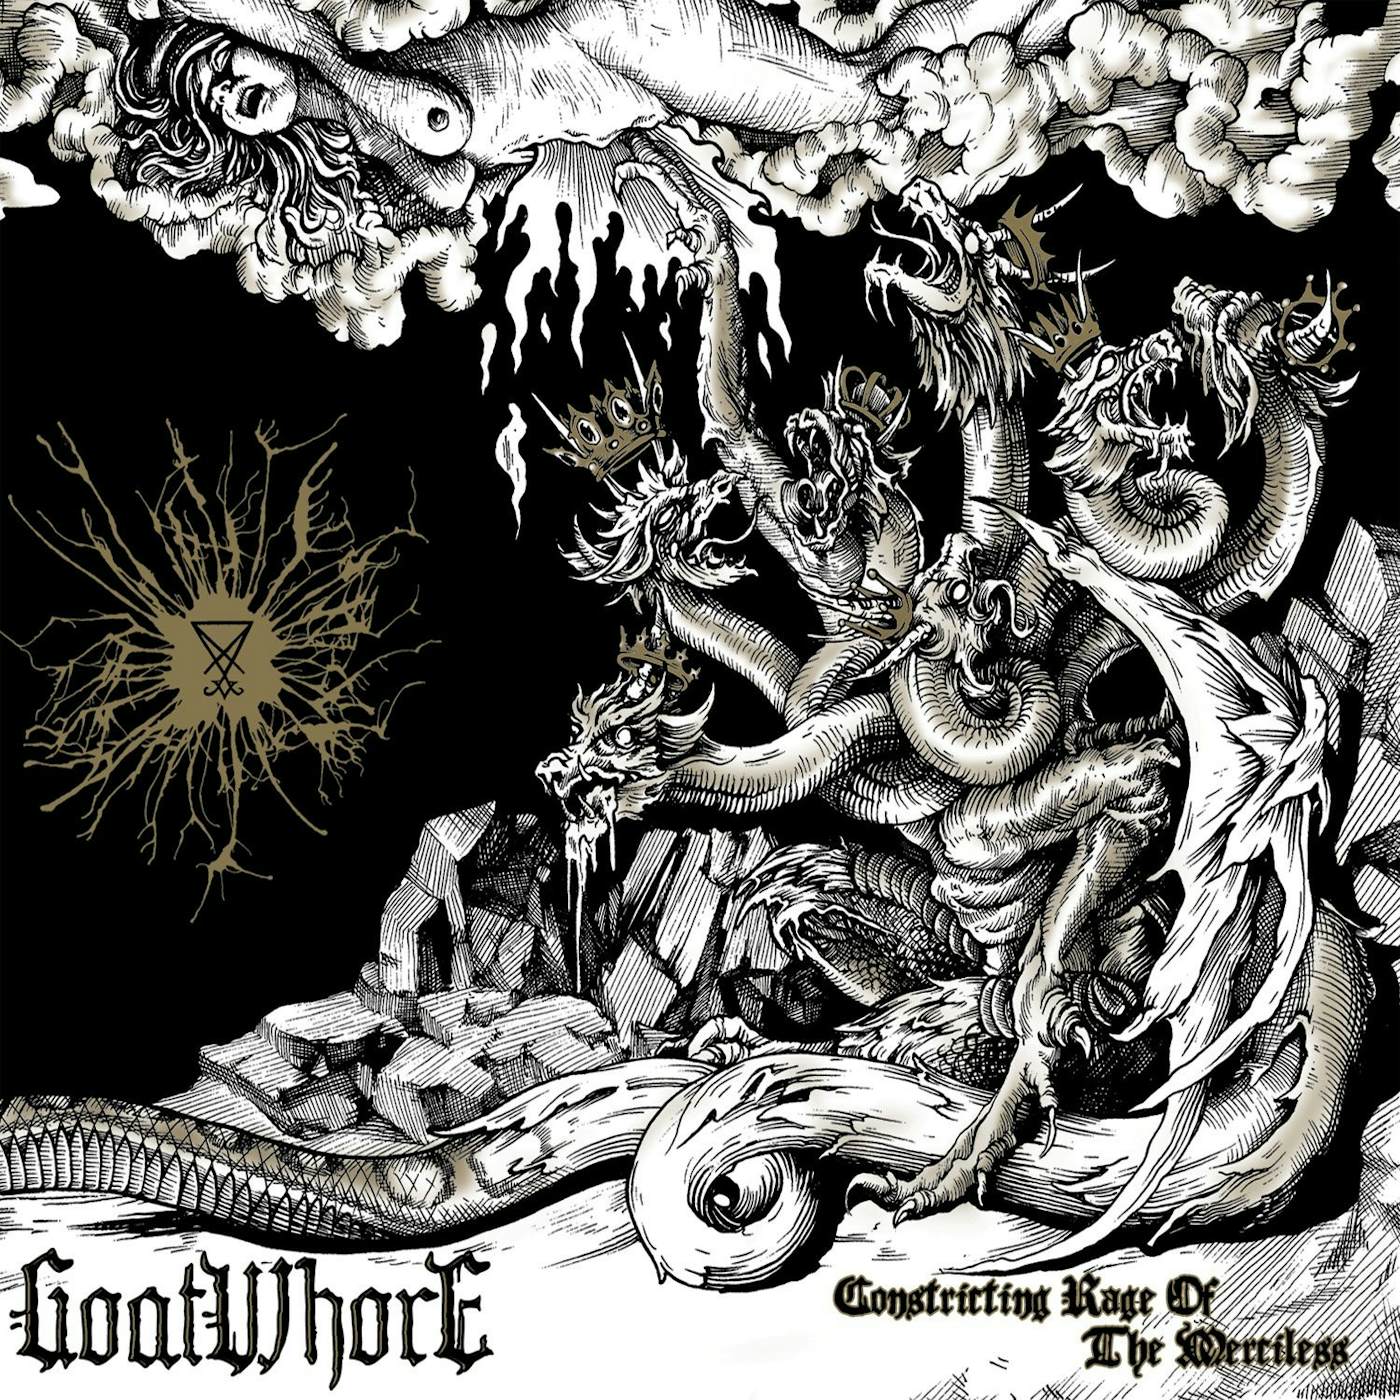 Goatwhore Constricting Rage of the Merciless Vinyl Record